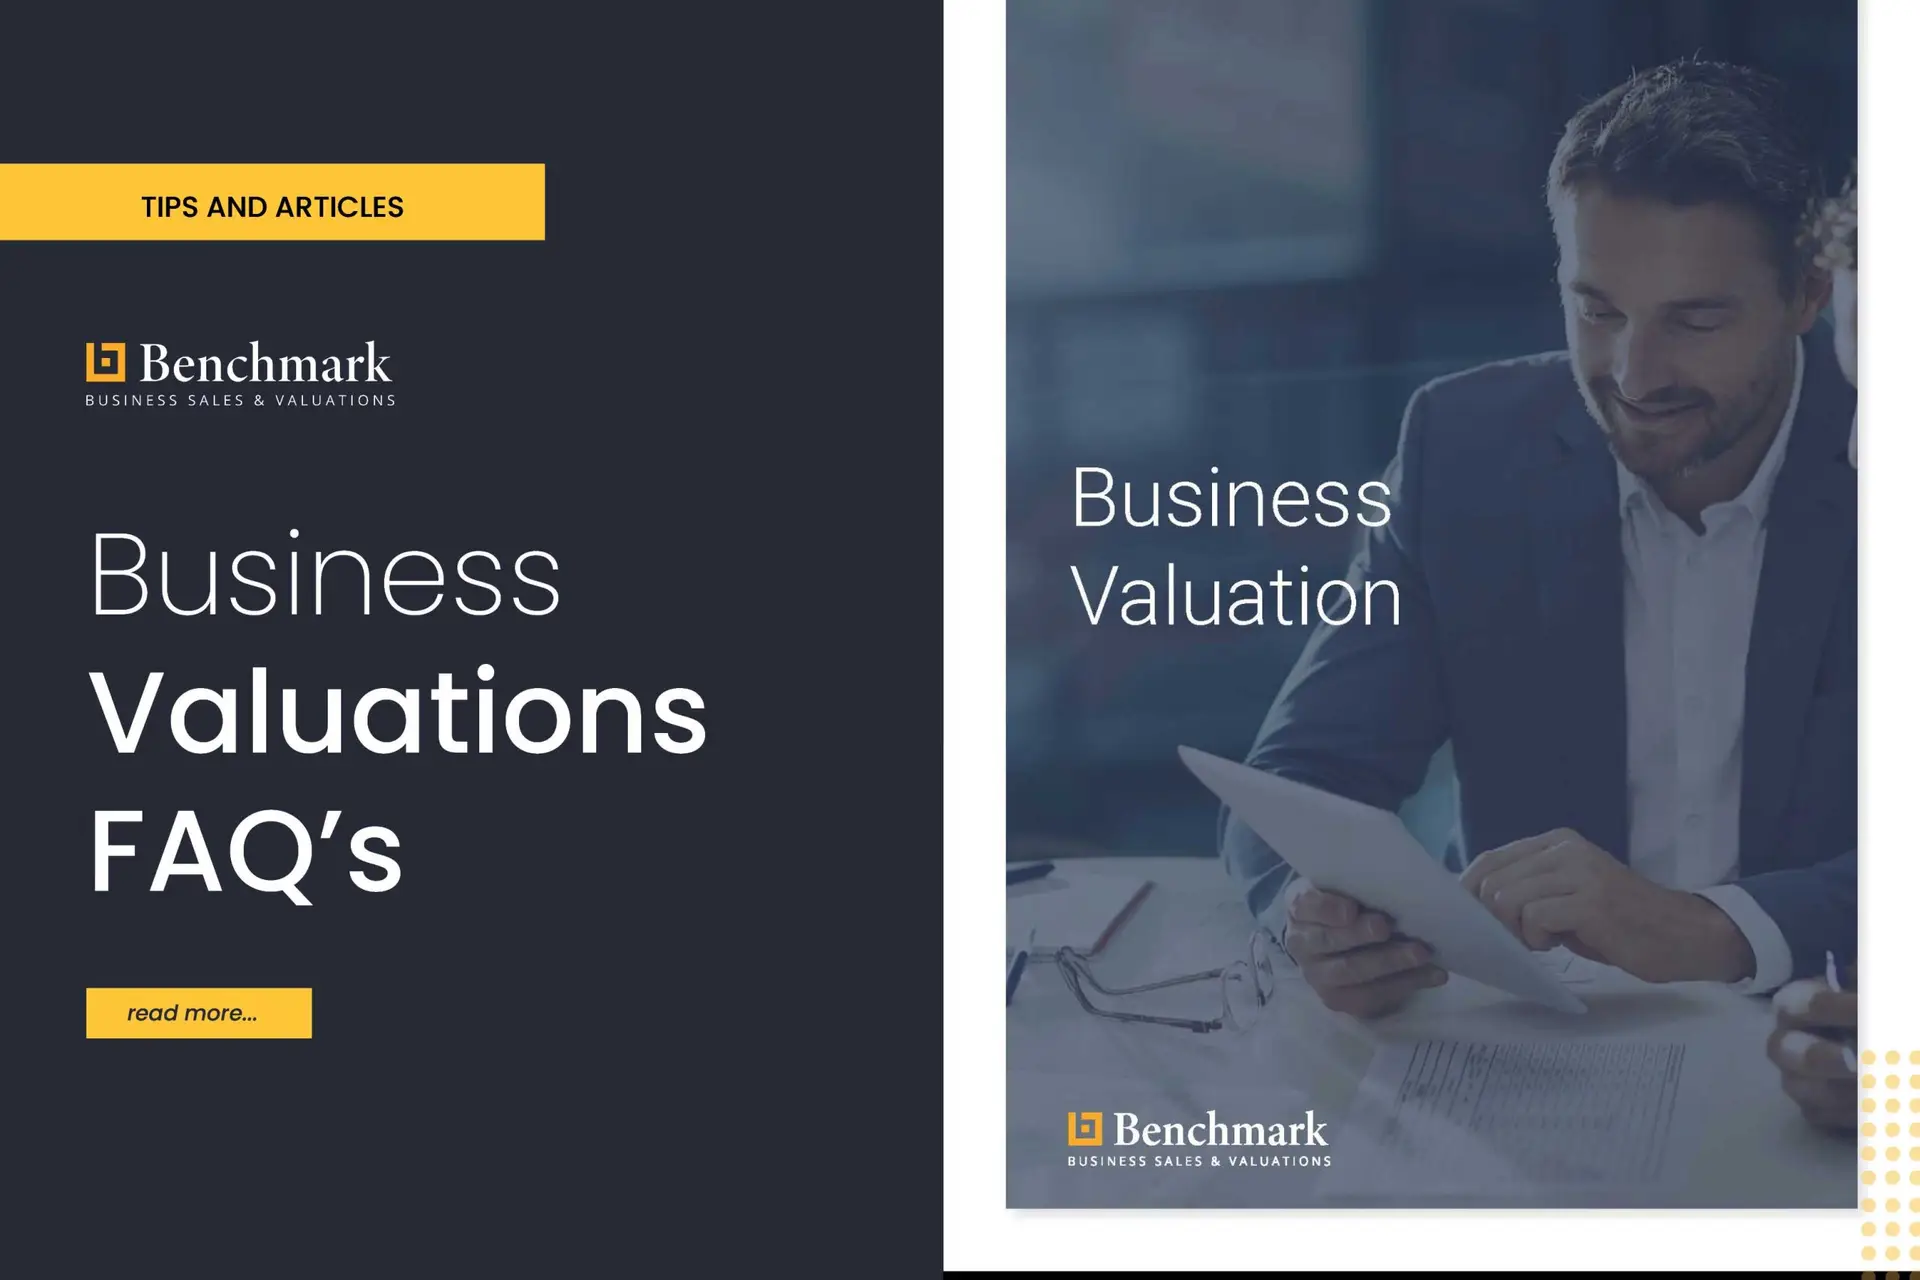 Business Valuations FAQ’s